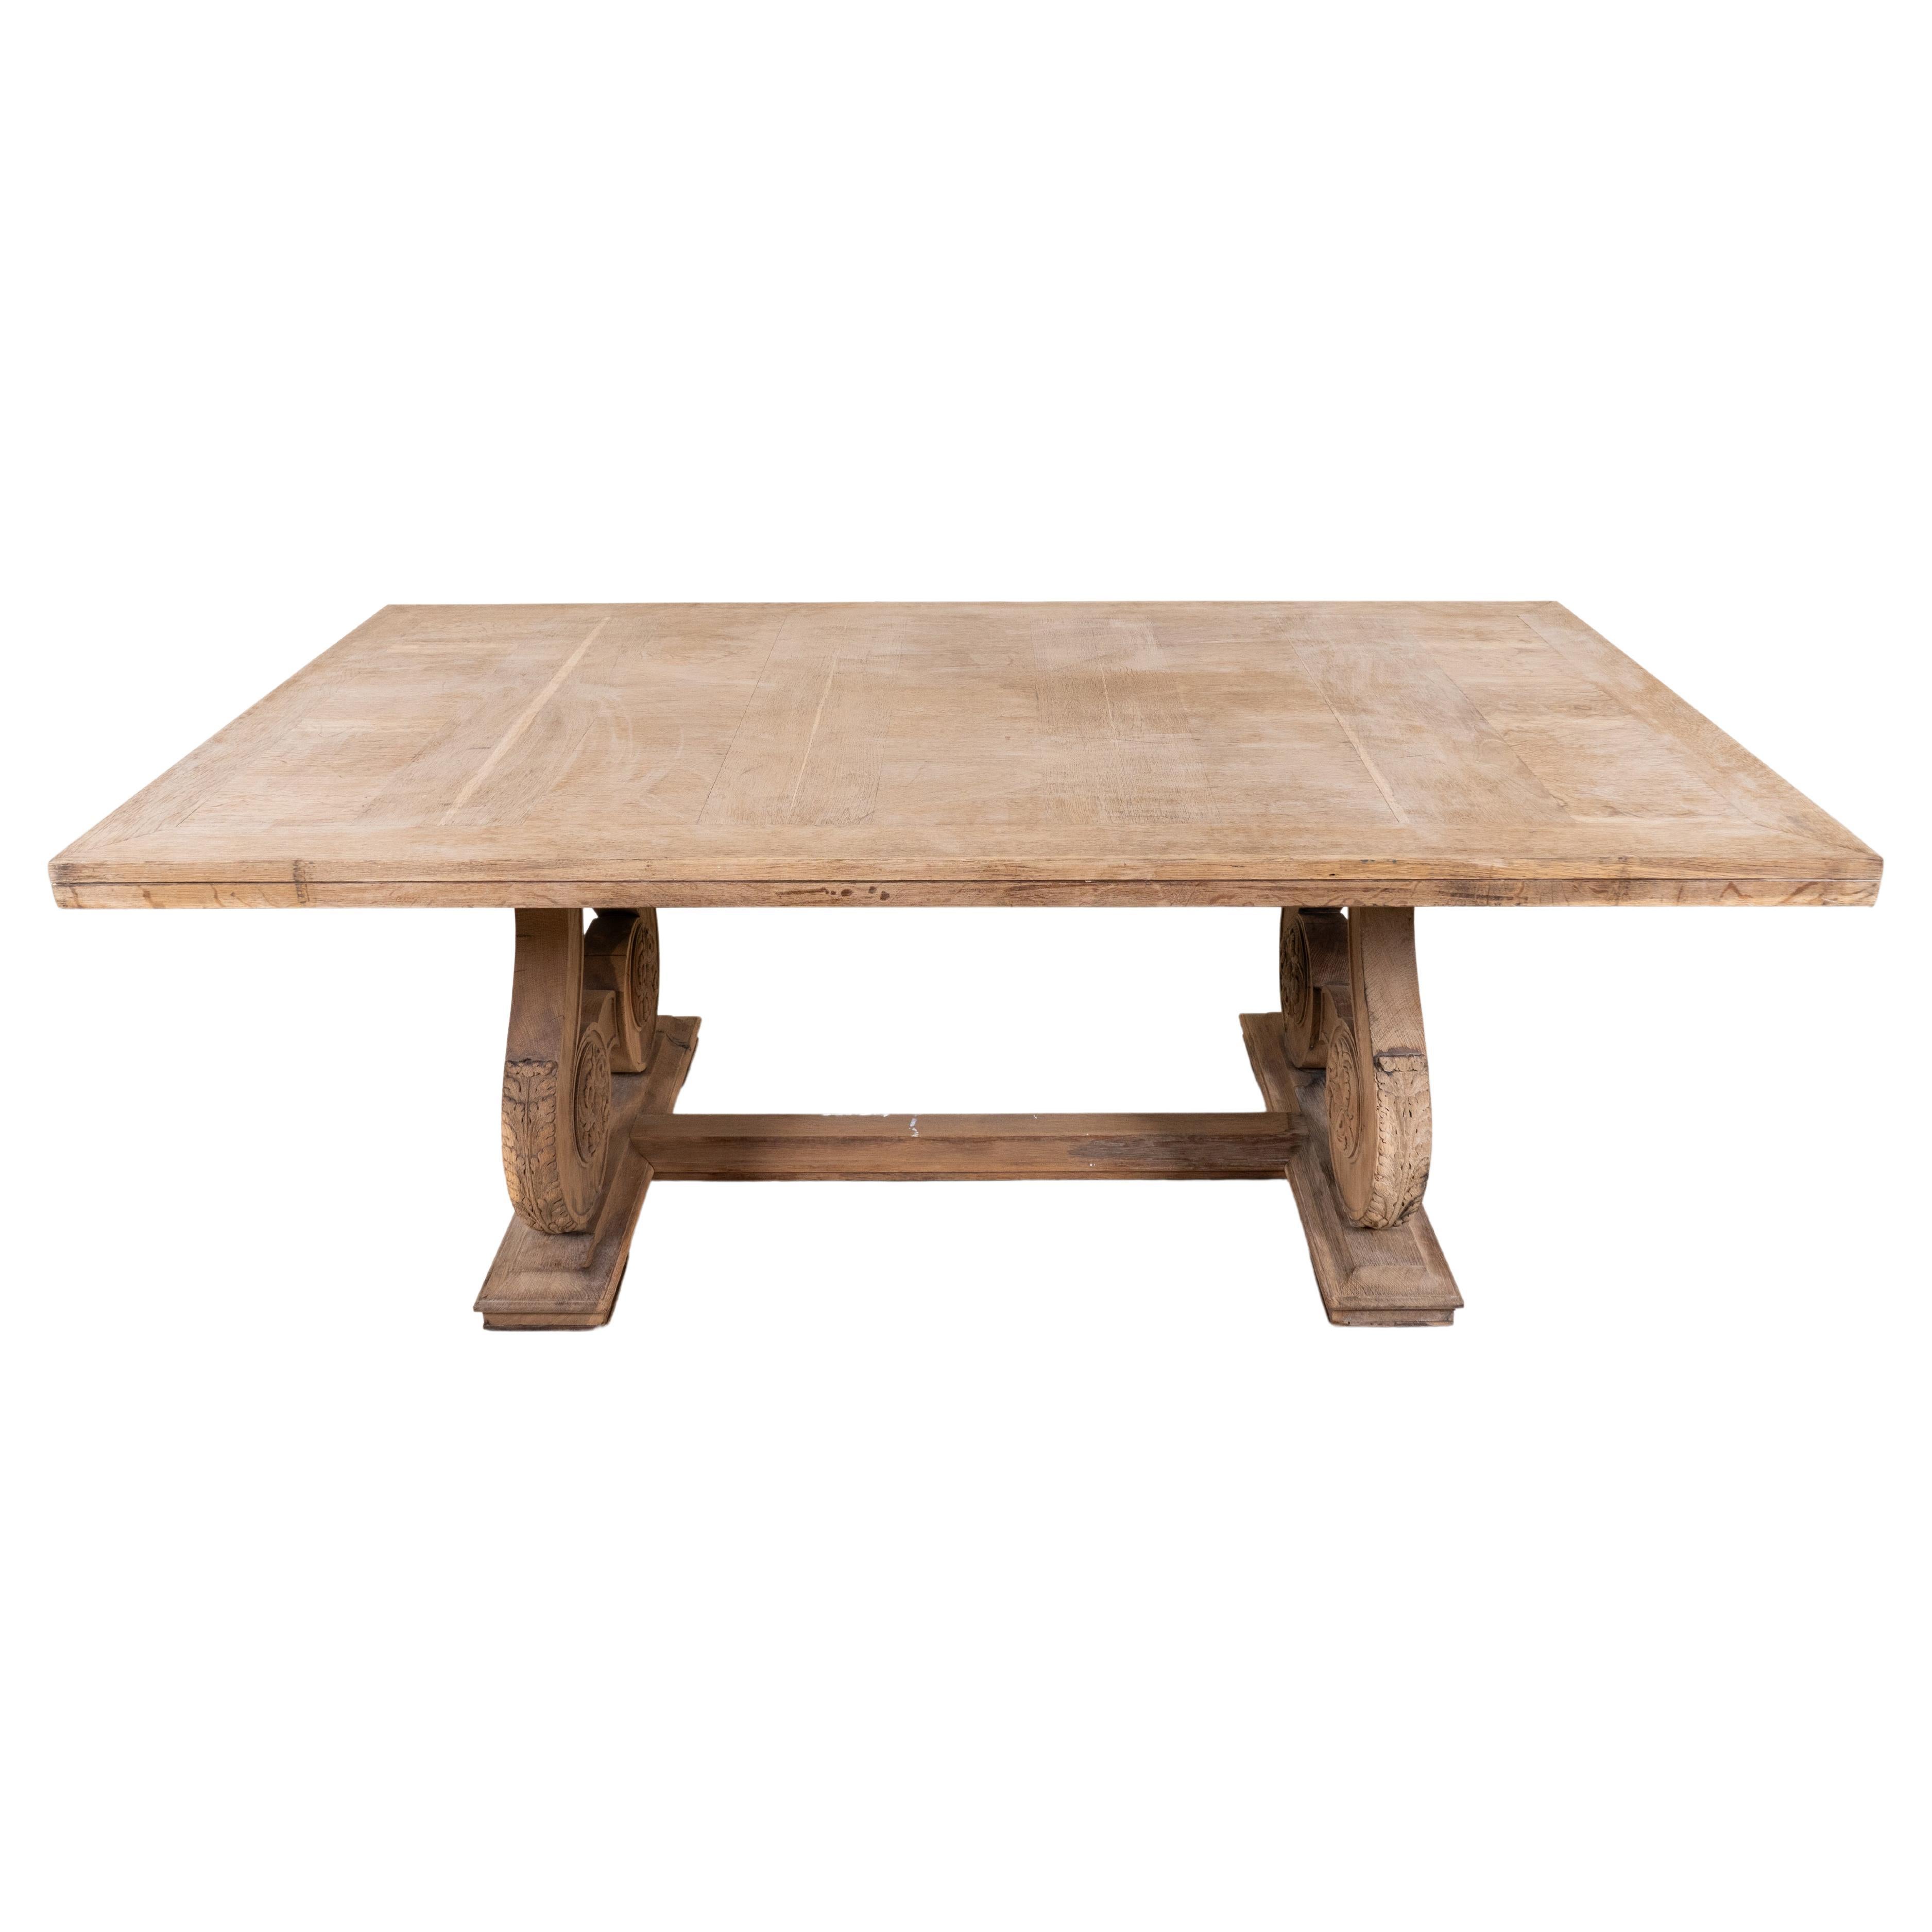 An Oak Wood Table with Carved Legs For Sale